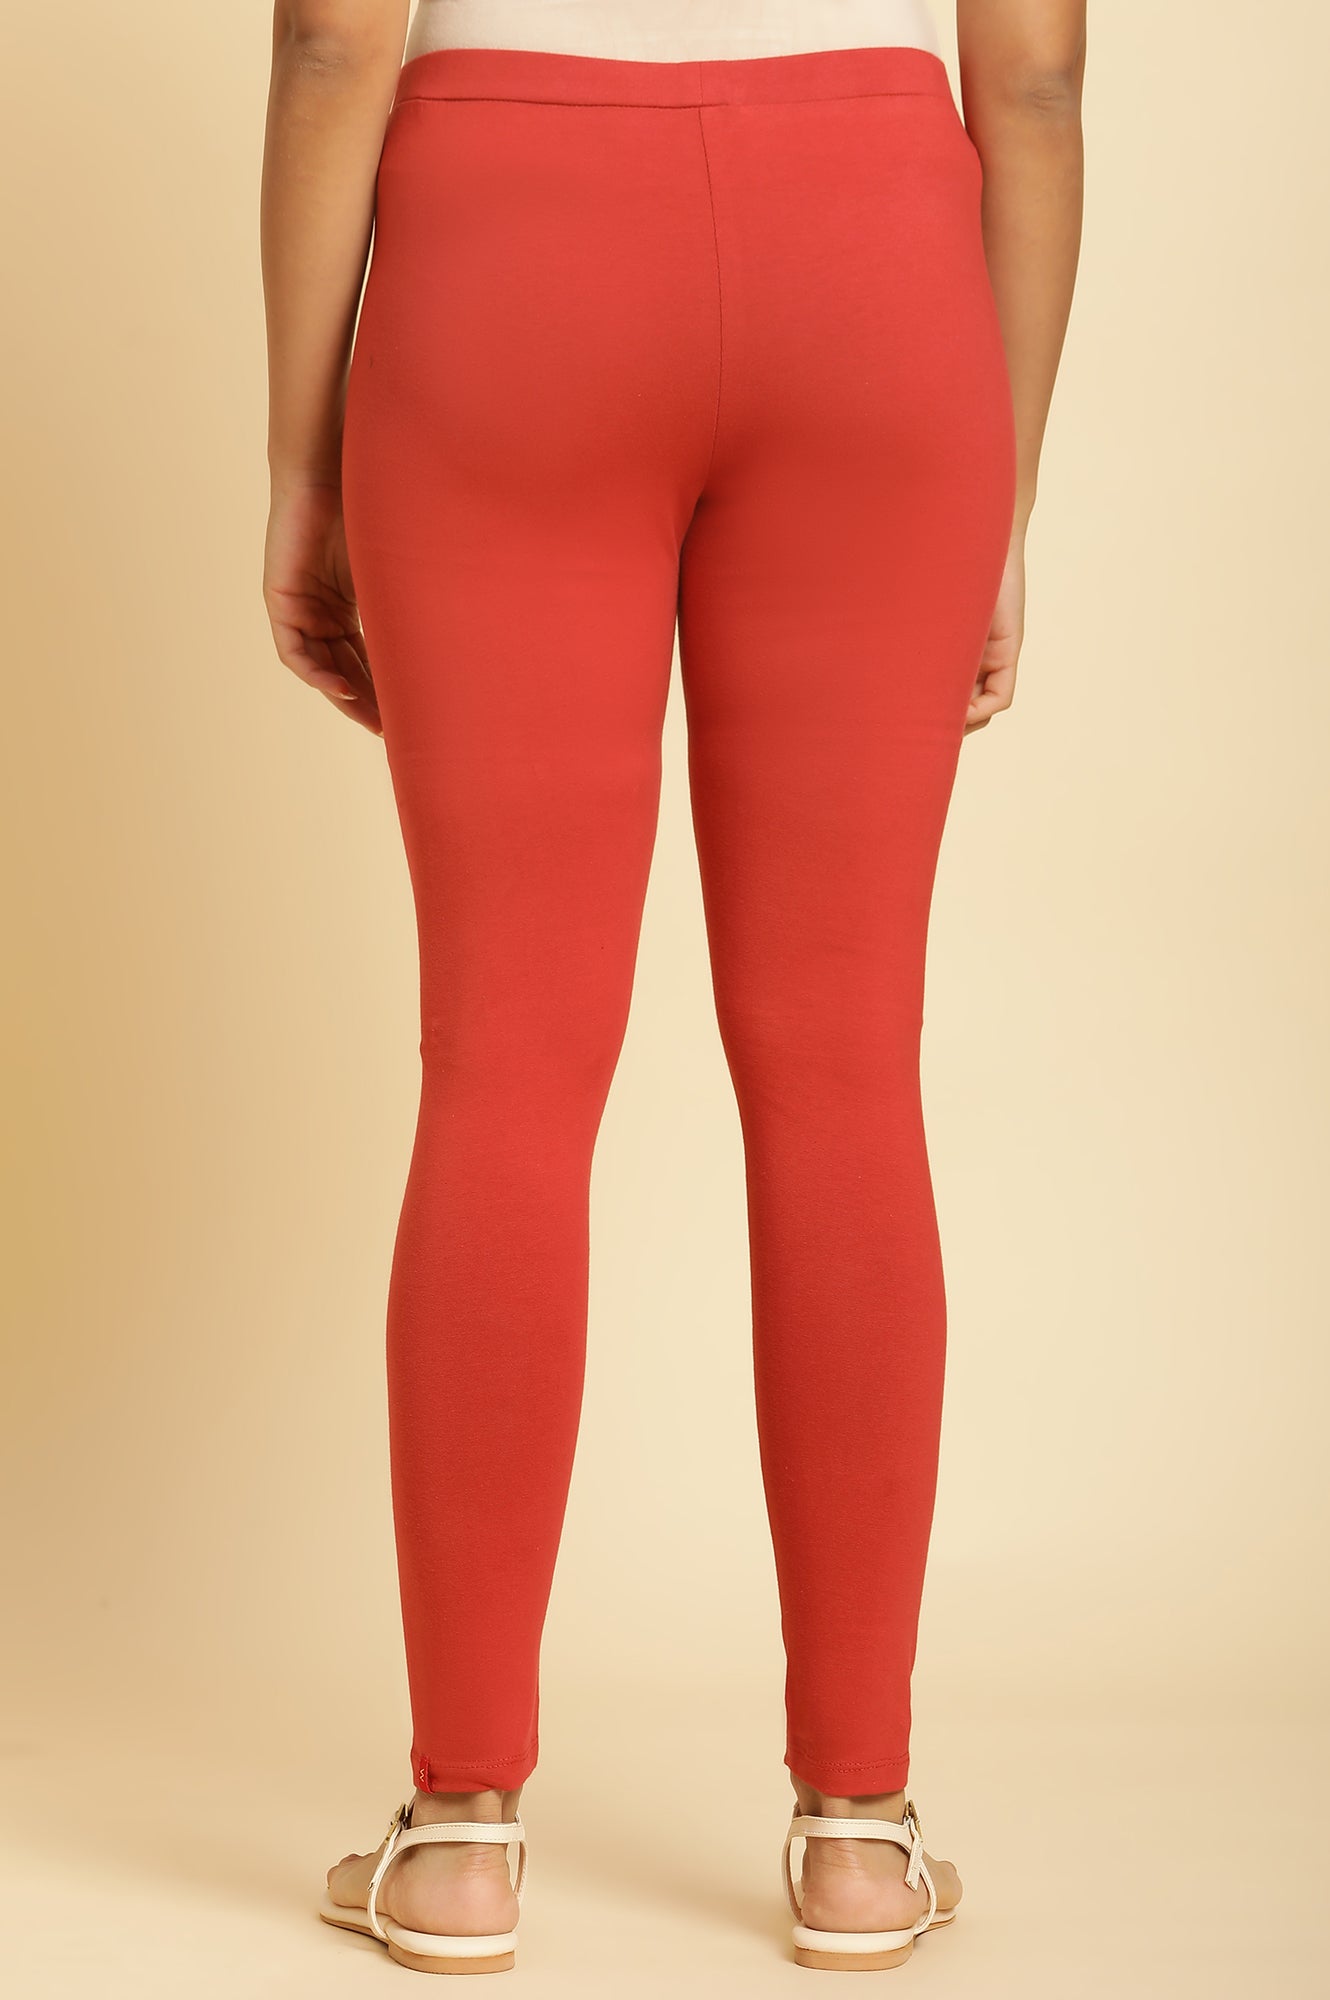 Rust Red Knitted Solid Tights.